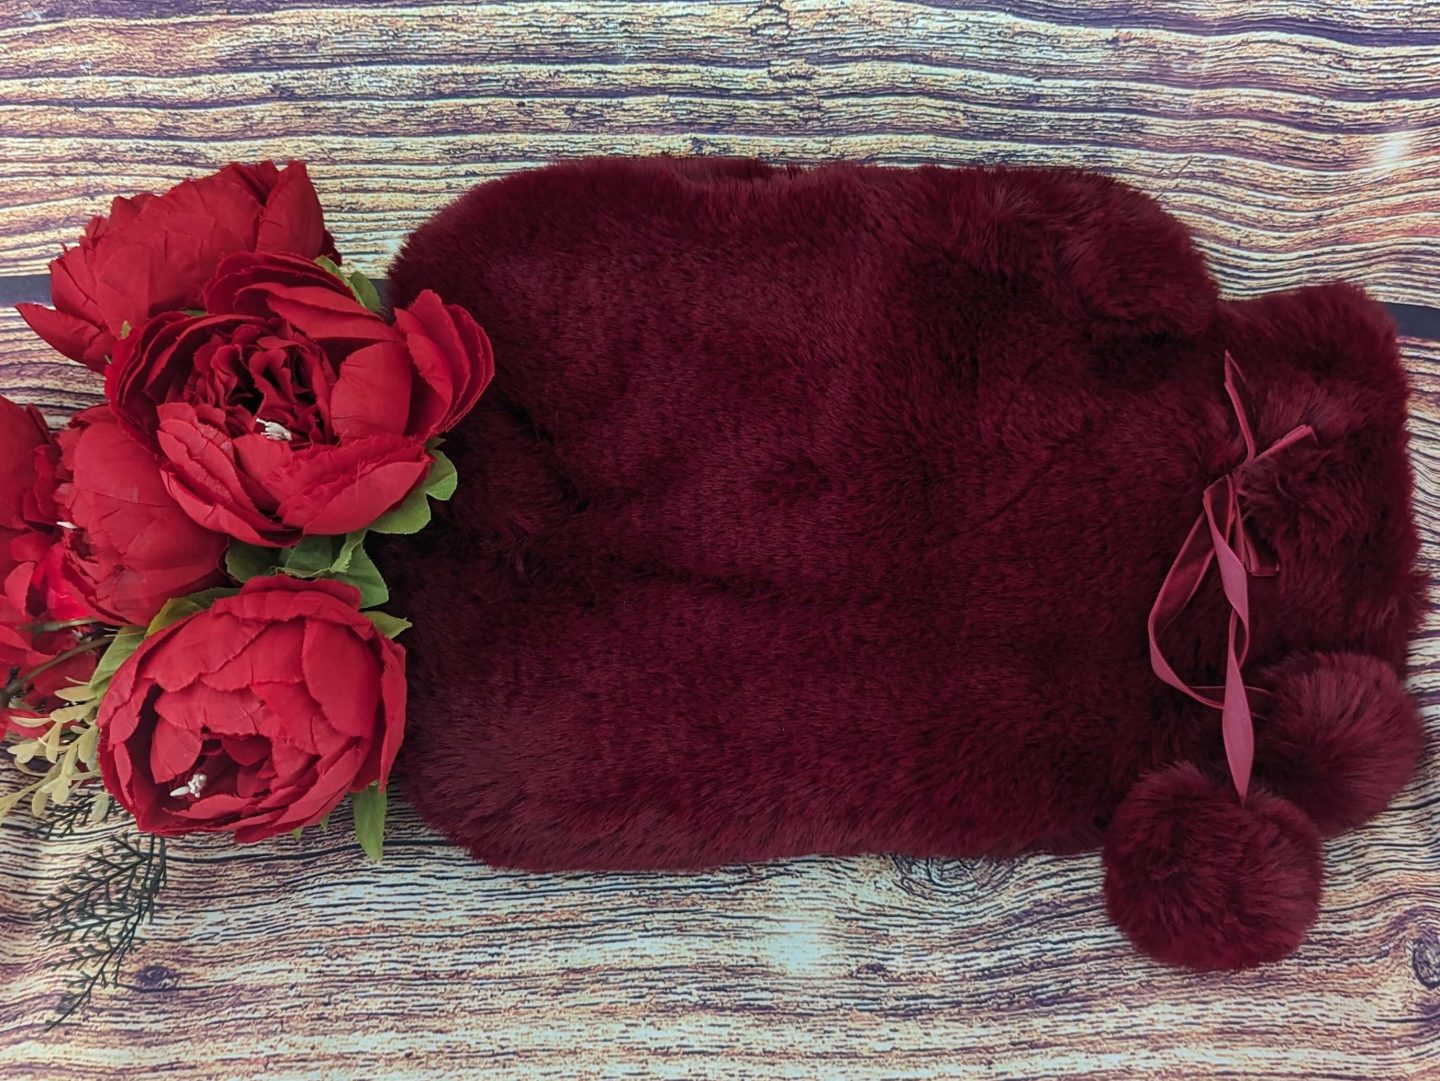 Red faux fur hot water bottle from Vendula London displayed against a wooden backdrop with red flowers beside